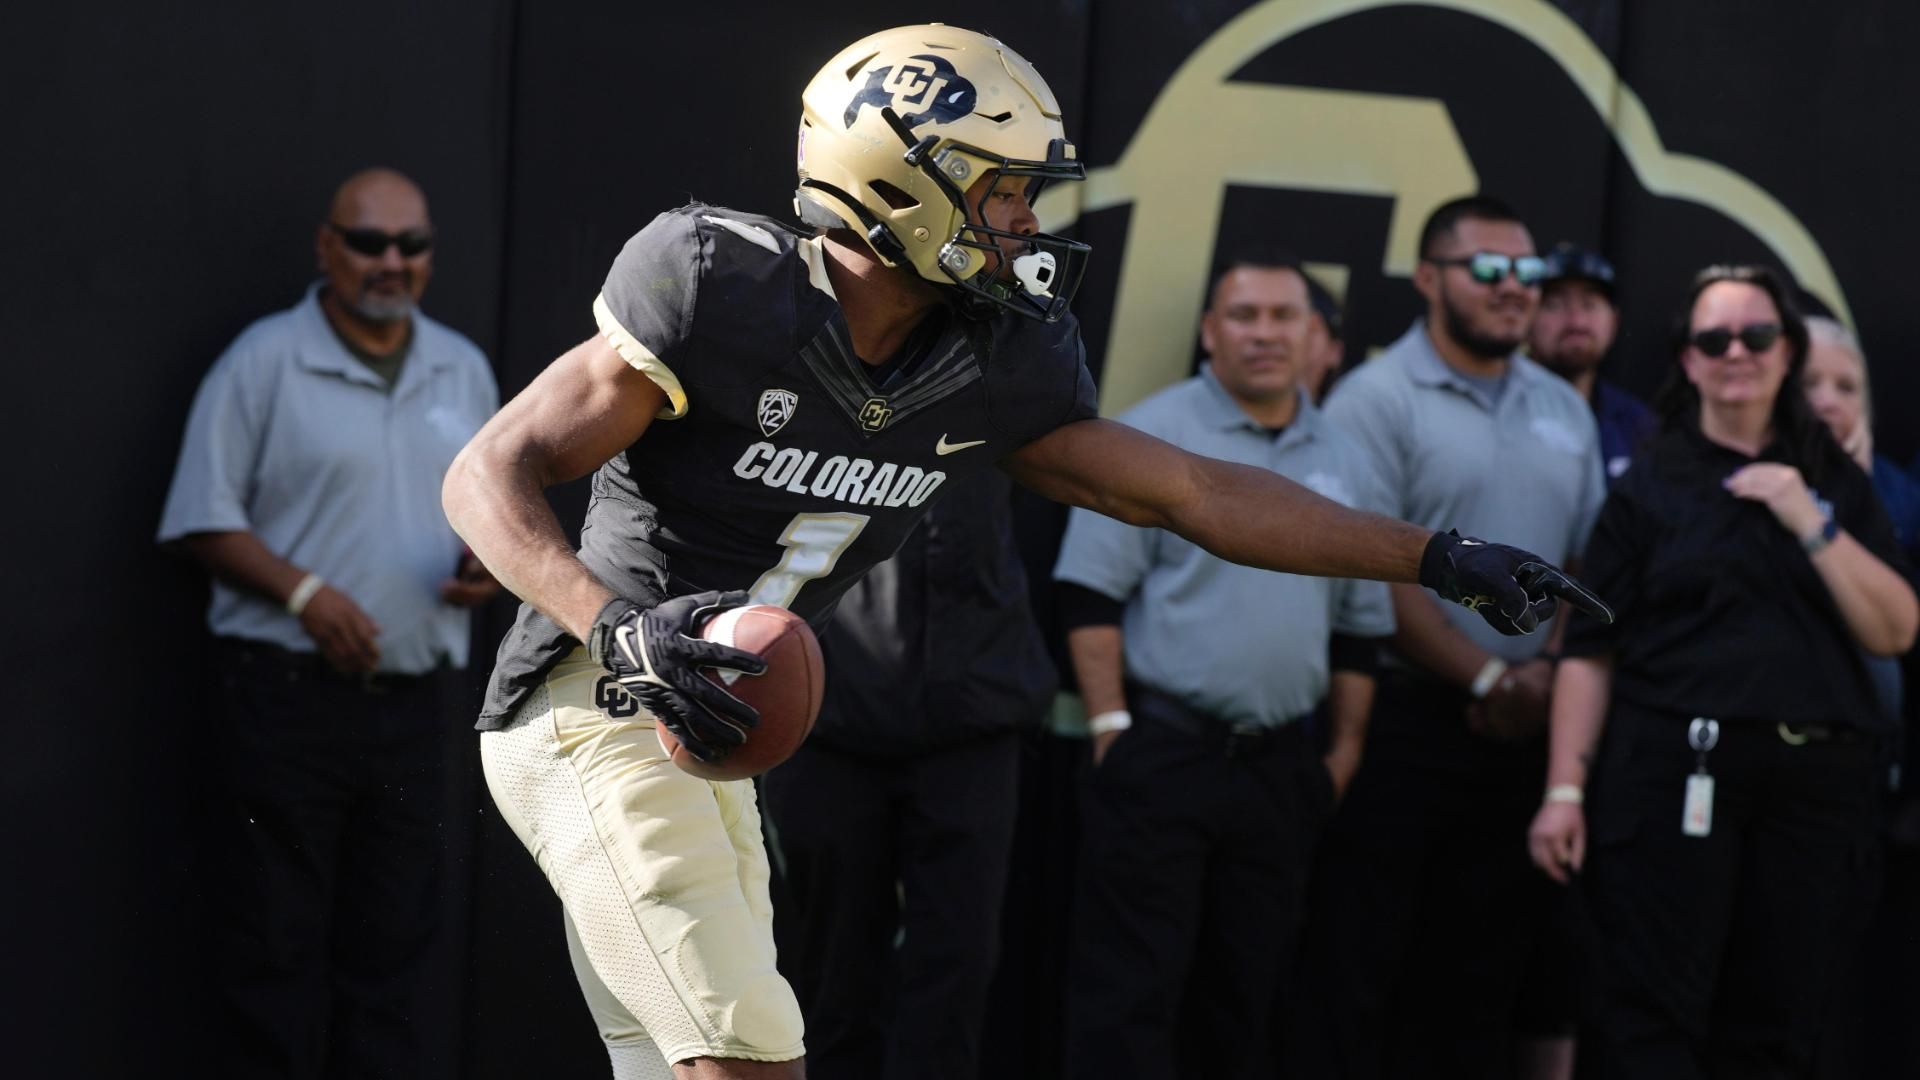 Colorado to give transfers access to practice film